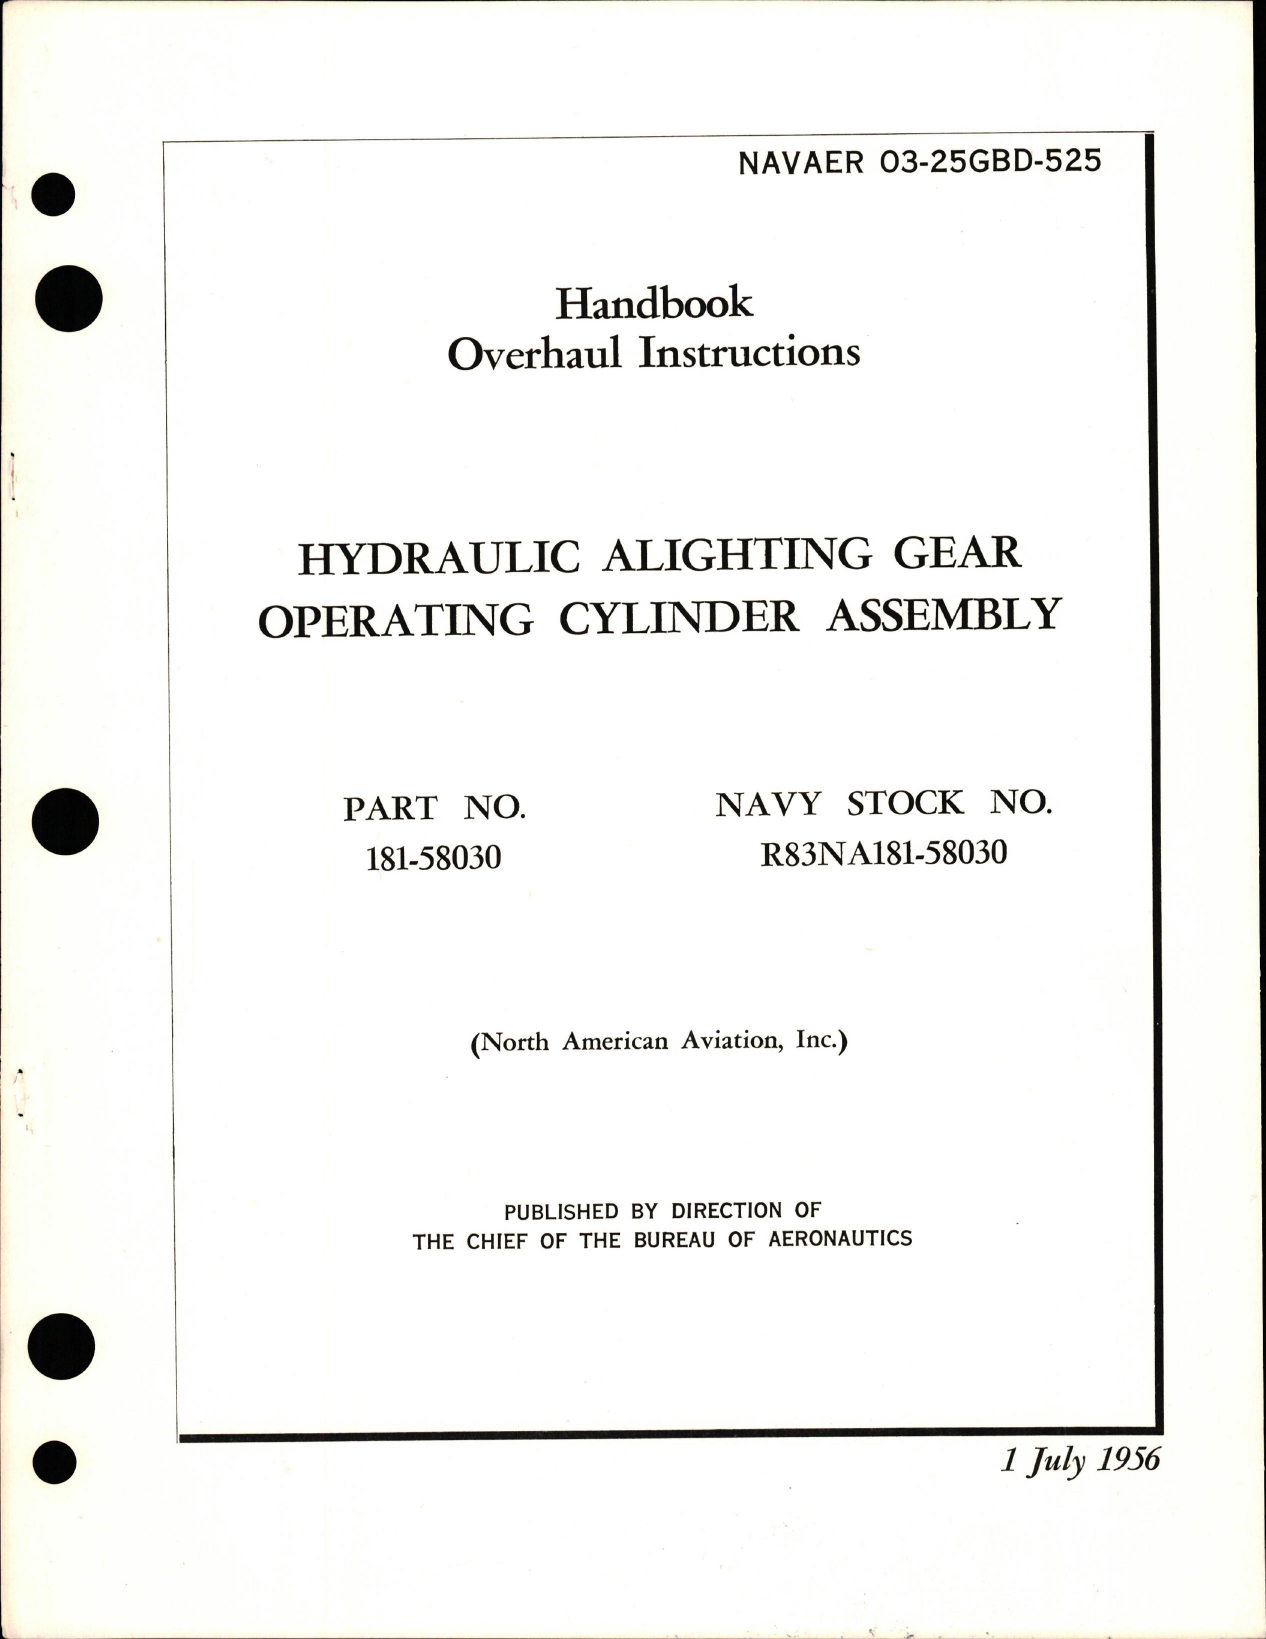 Sample page 1 from AirCorps Library document: Overhaul Instructions for Hydraulic Alighting Gear Operating Cylinder Assy - Part 181-58030 